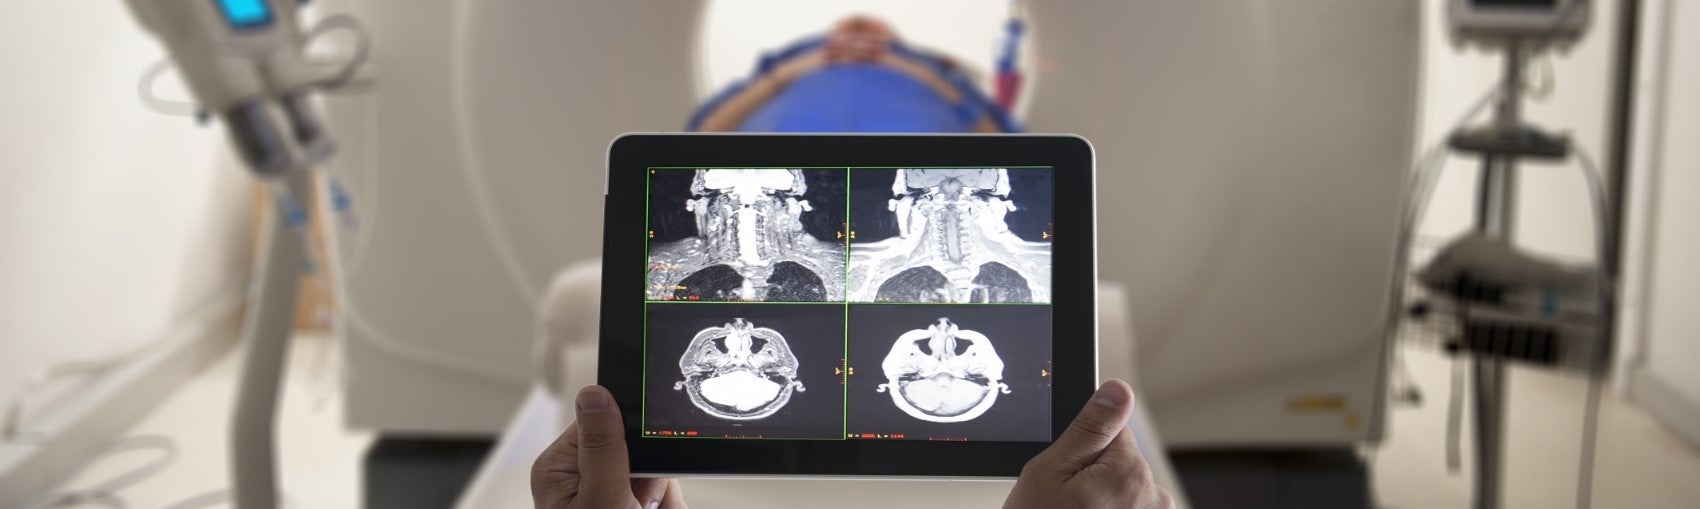 Hands holding a tablet displaying scans in front of an MRI machine.